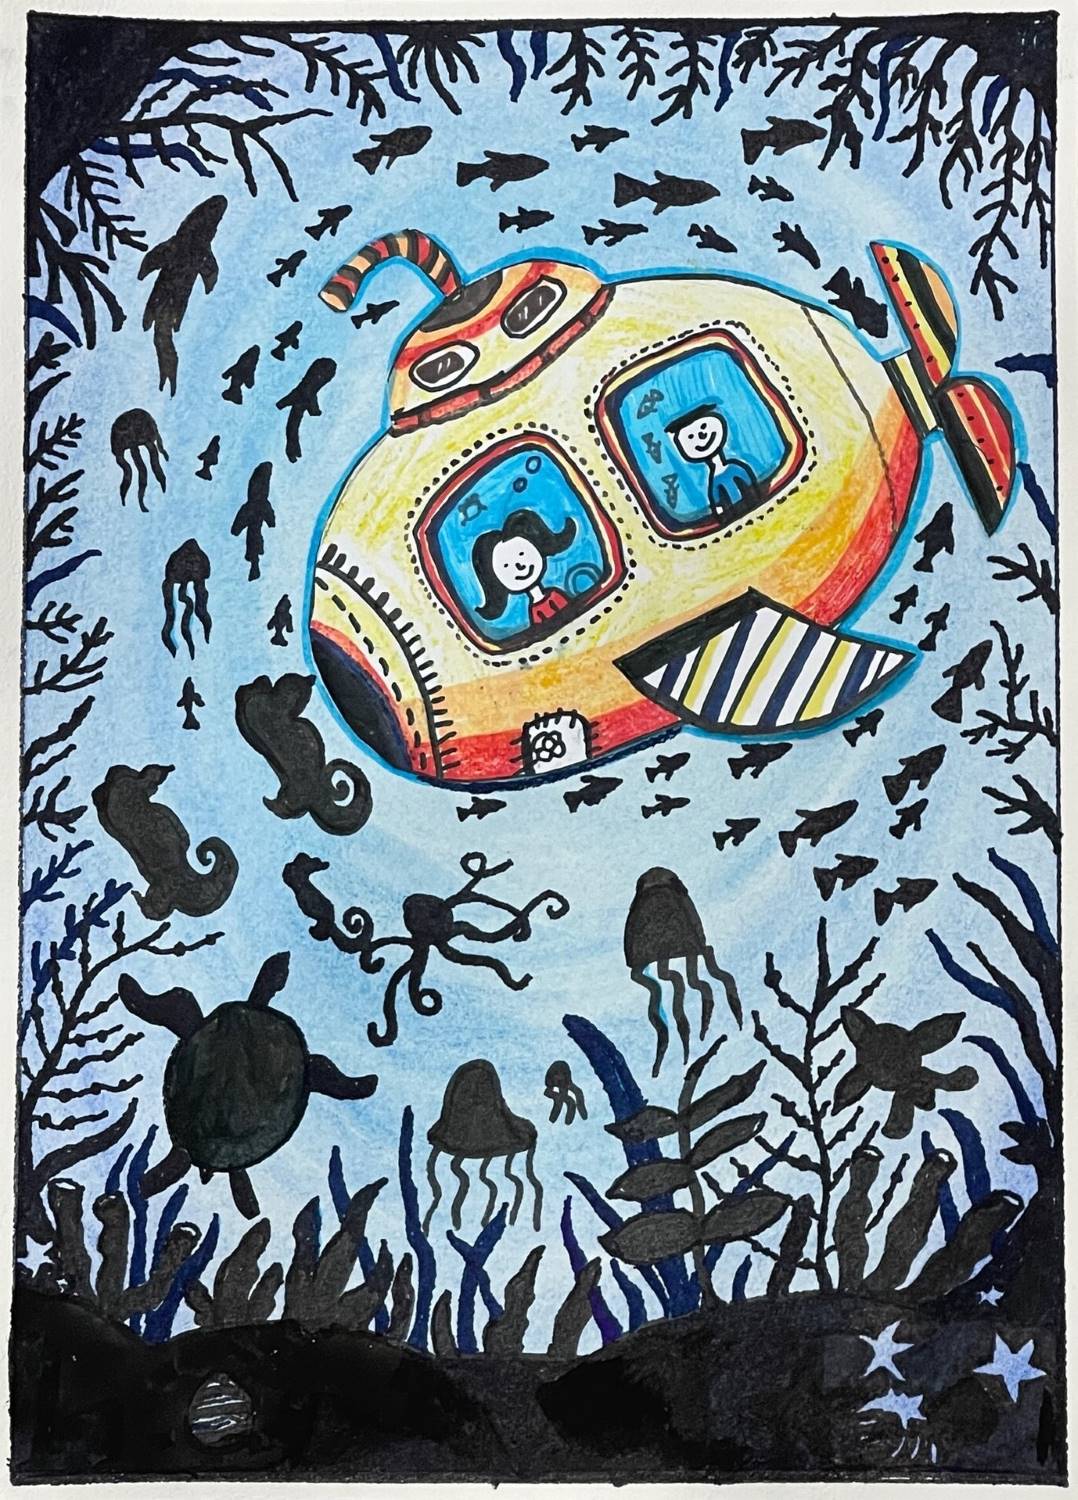 Two children can be seen through the windows of a submarine that is circled by a wide variety of ocean creatures